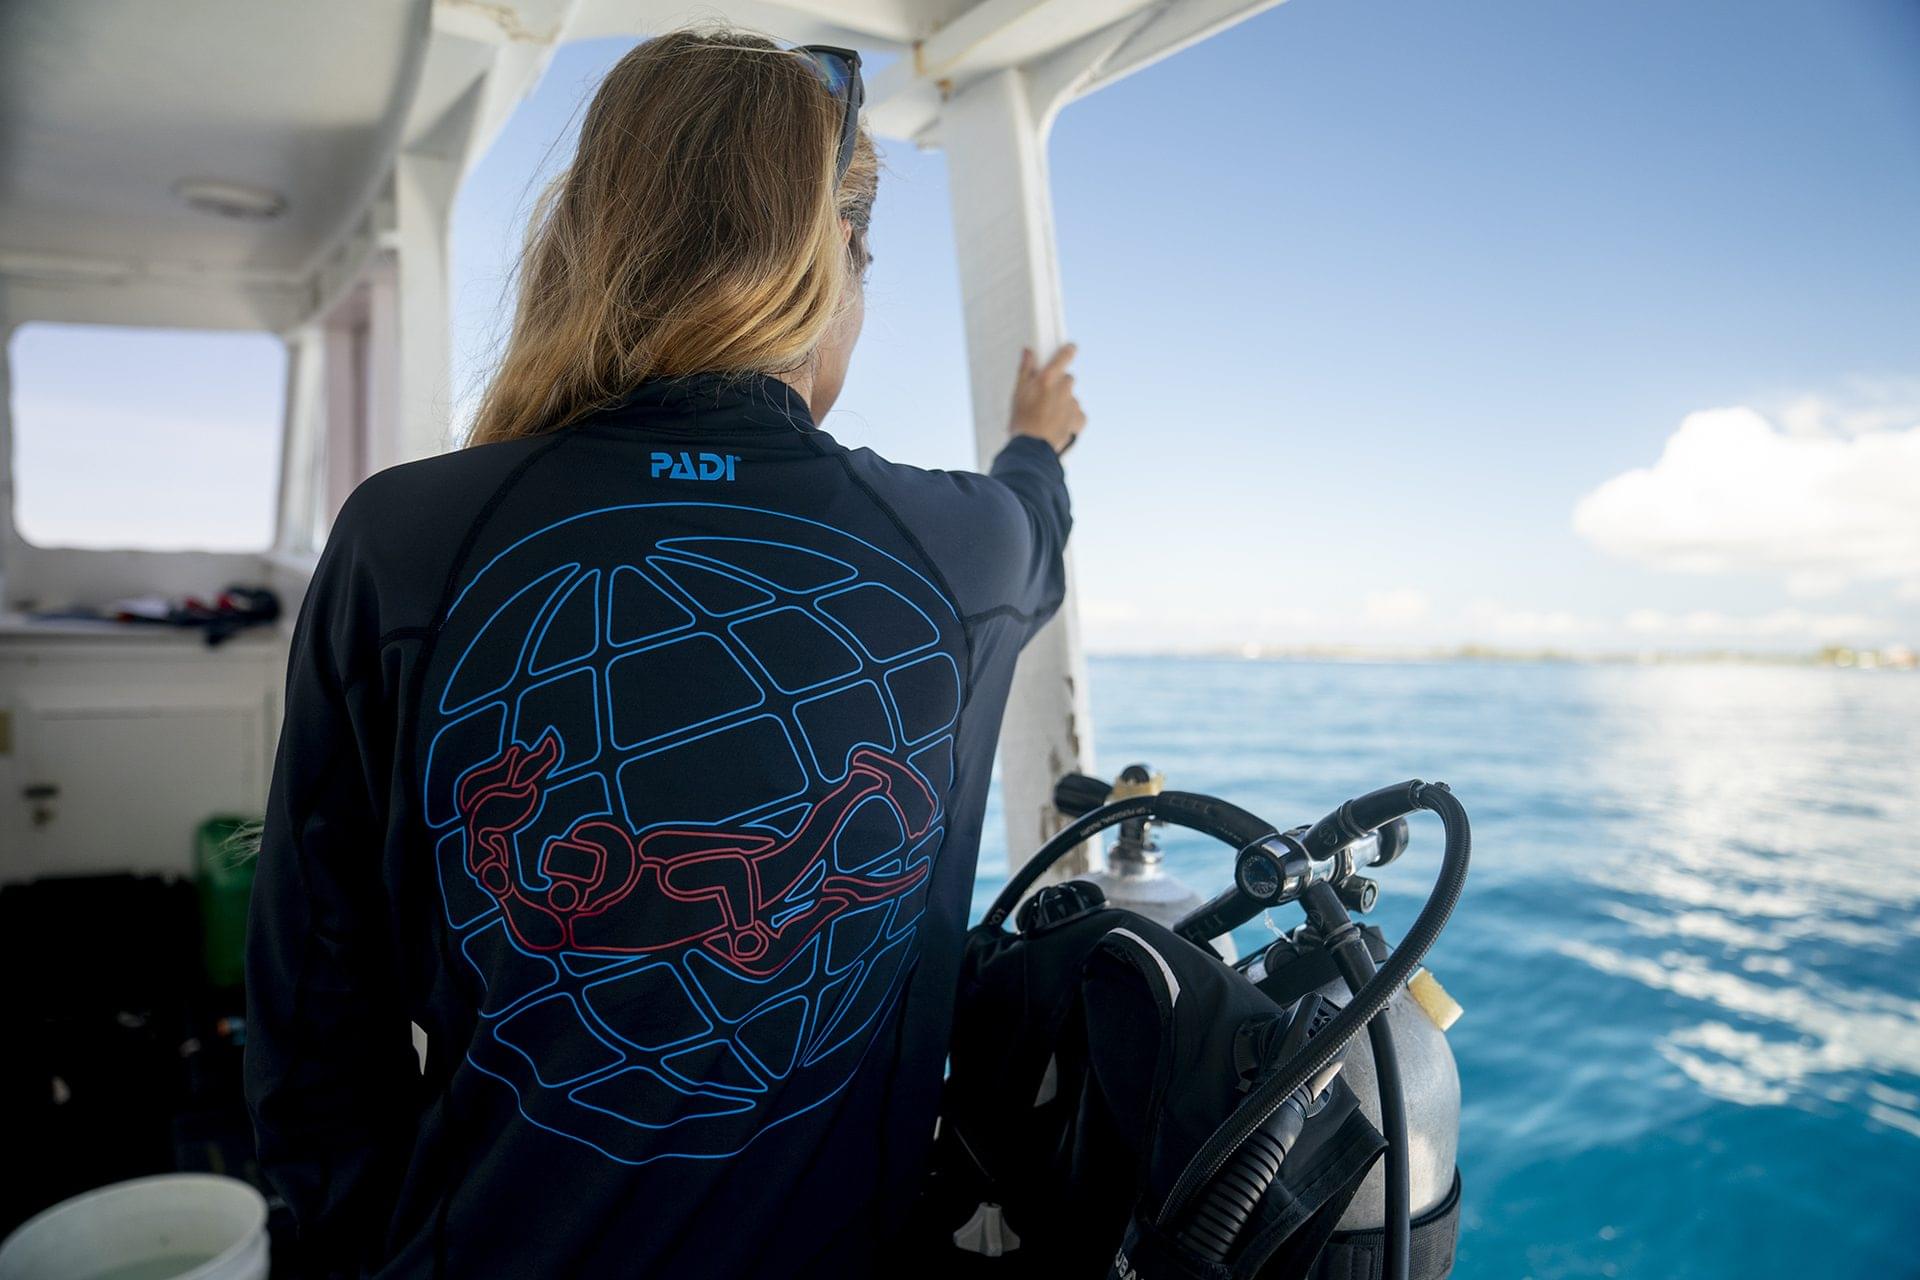 A PADI diver who has brought extra swimsuits after getting the best liveaboard advice about what to pack on a scuba vacation